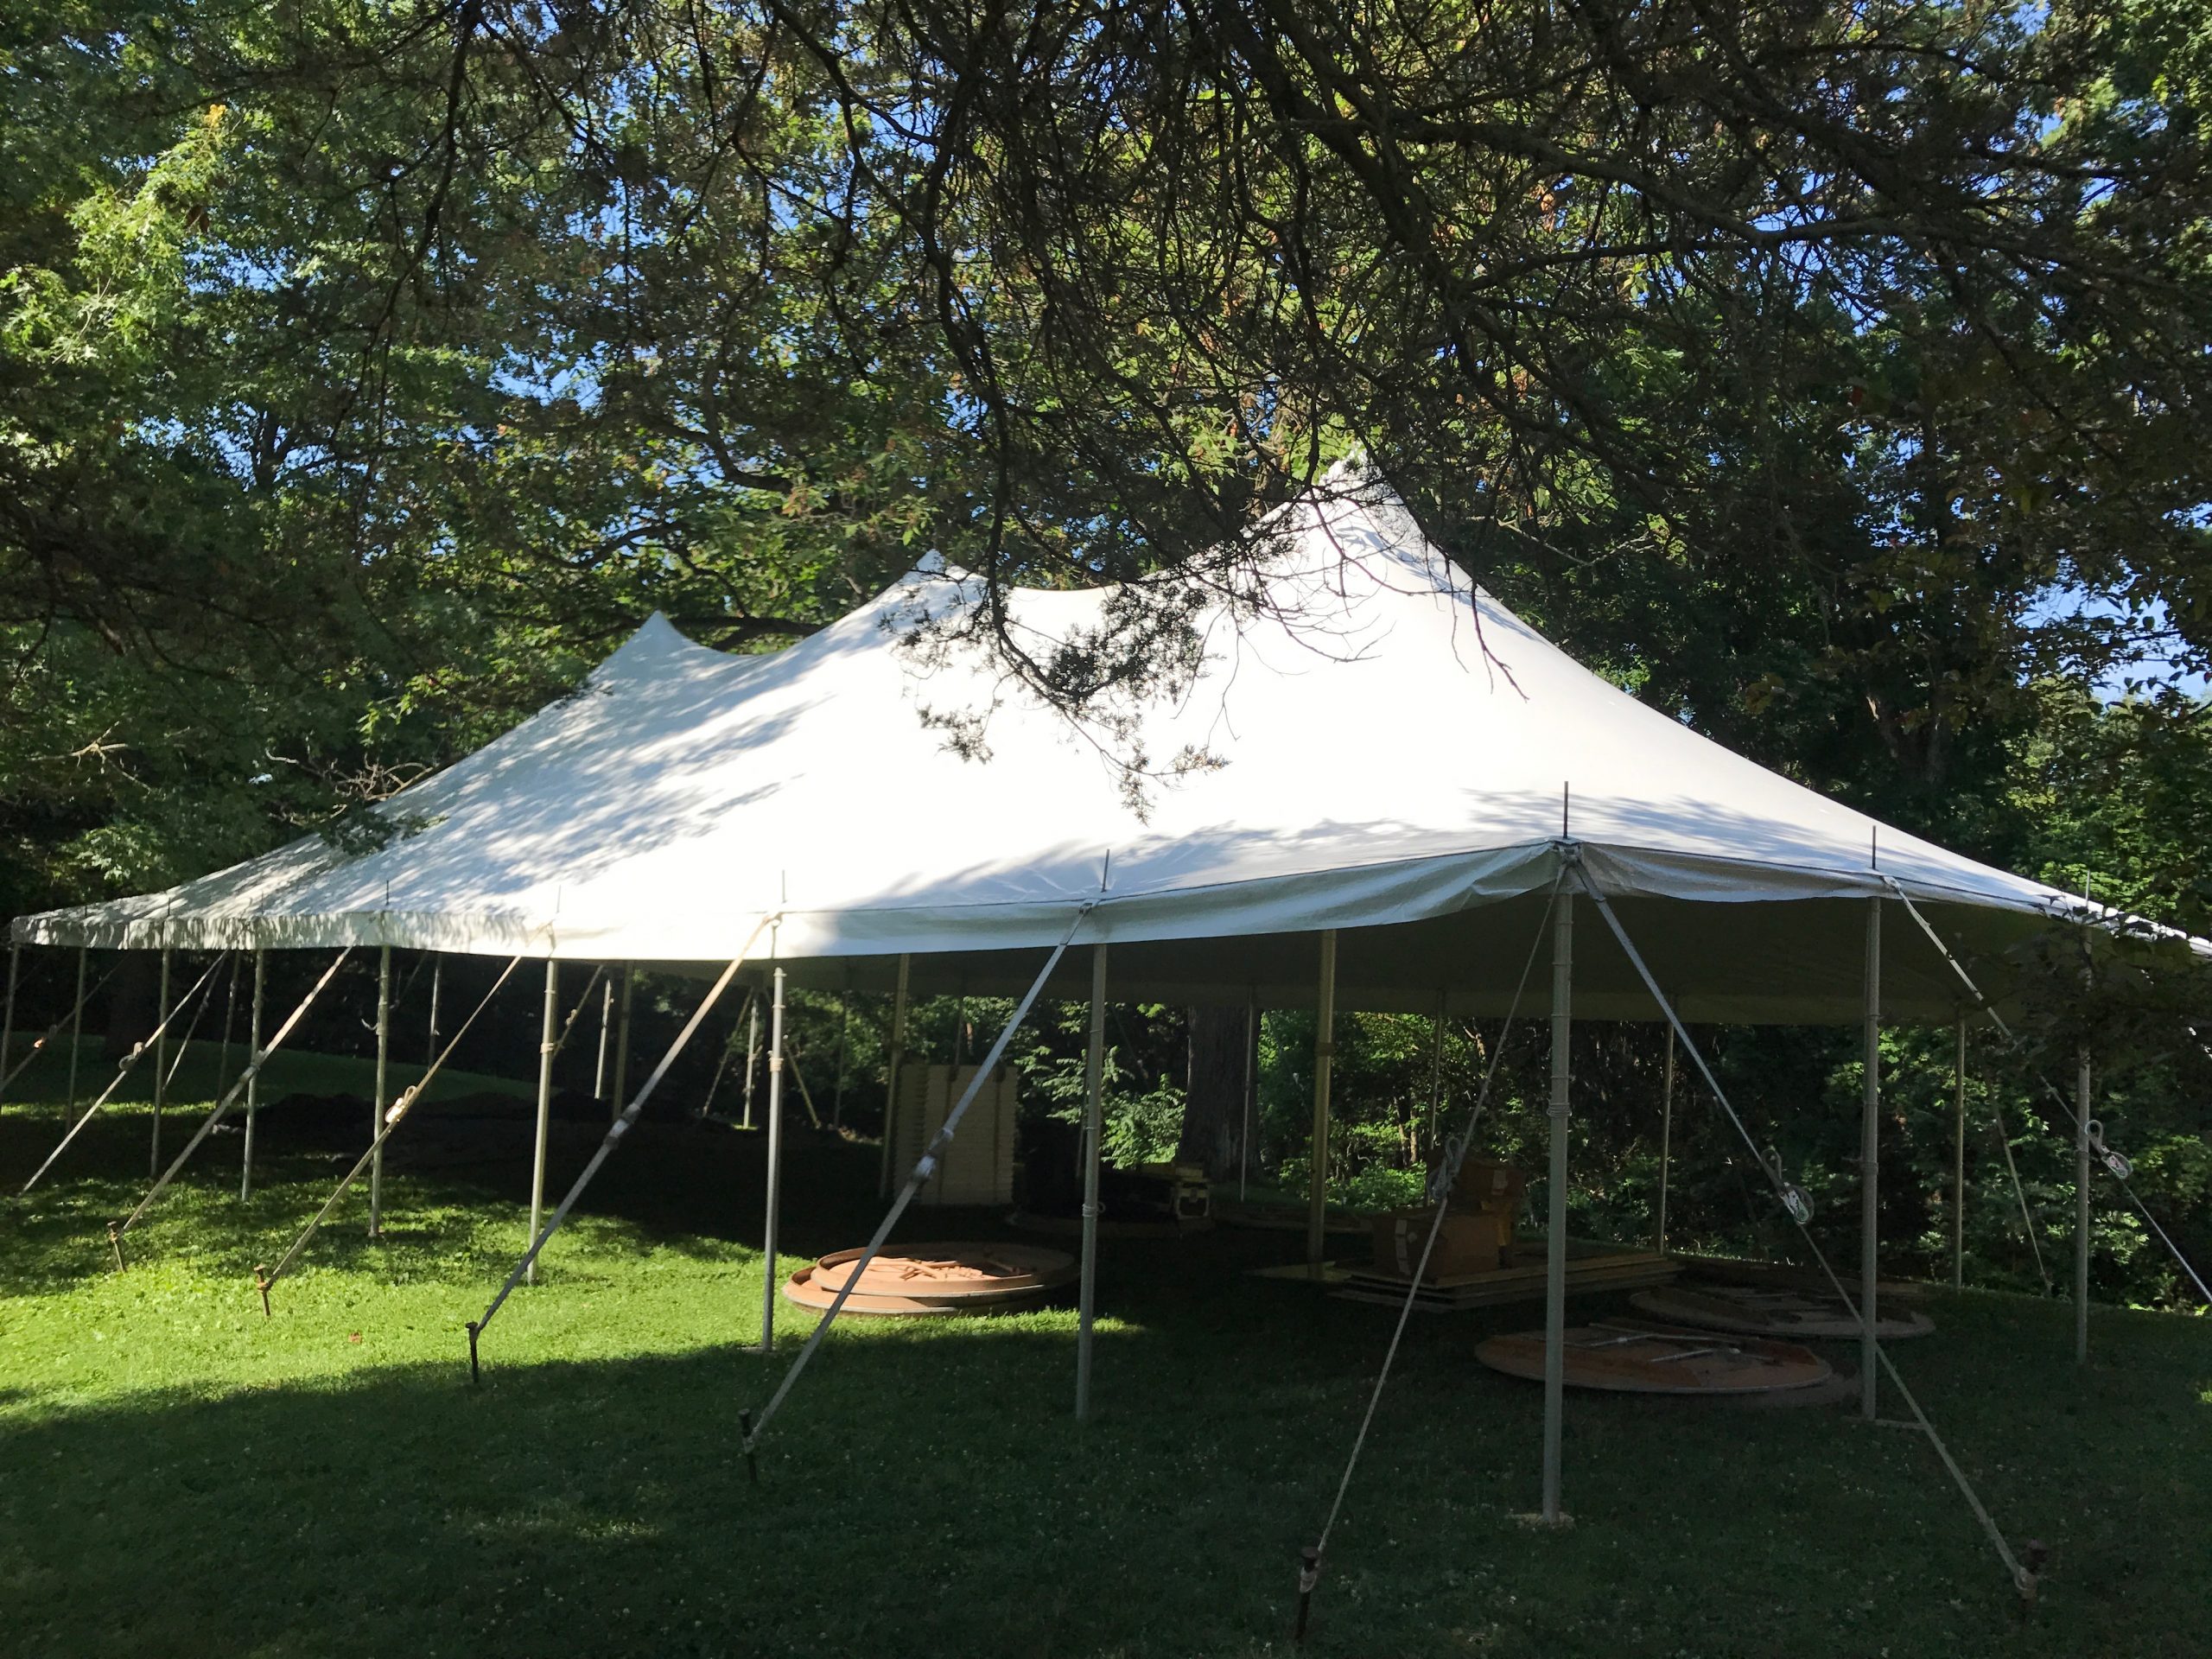 Corner of the 30' x 60' rope and pole wedding tent in Mount Vernon, IA